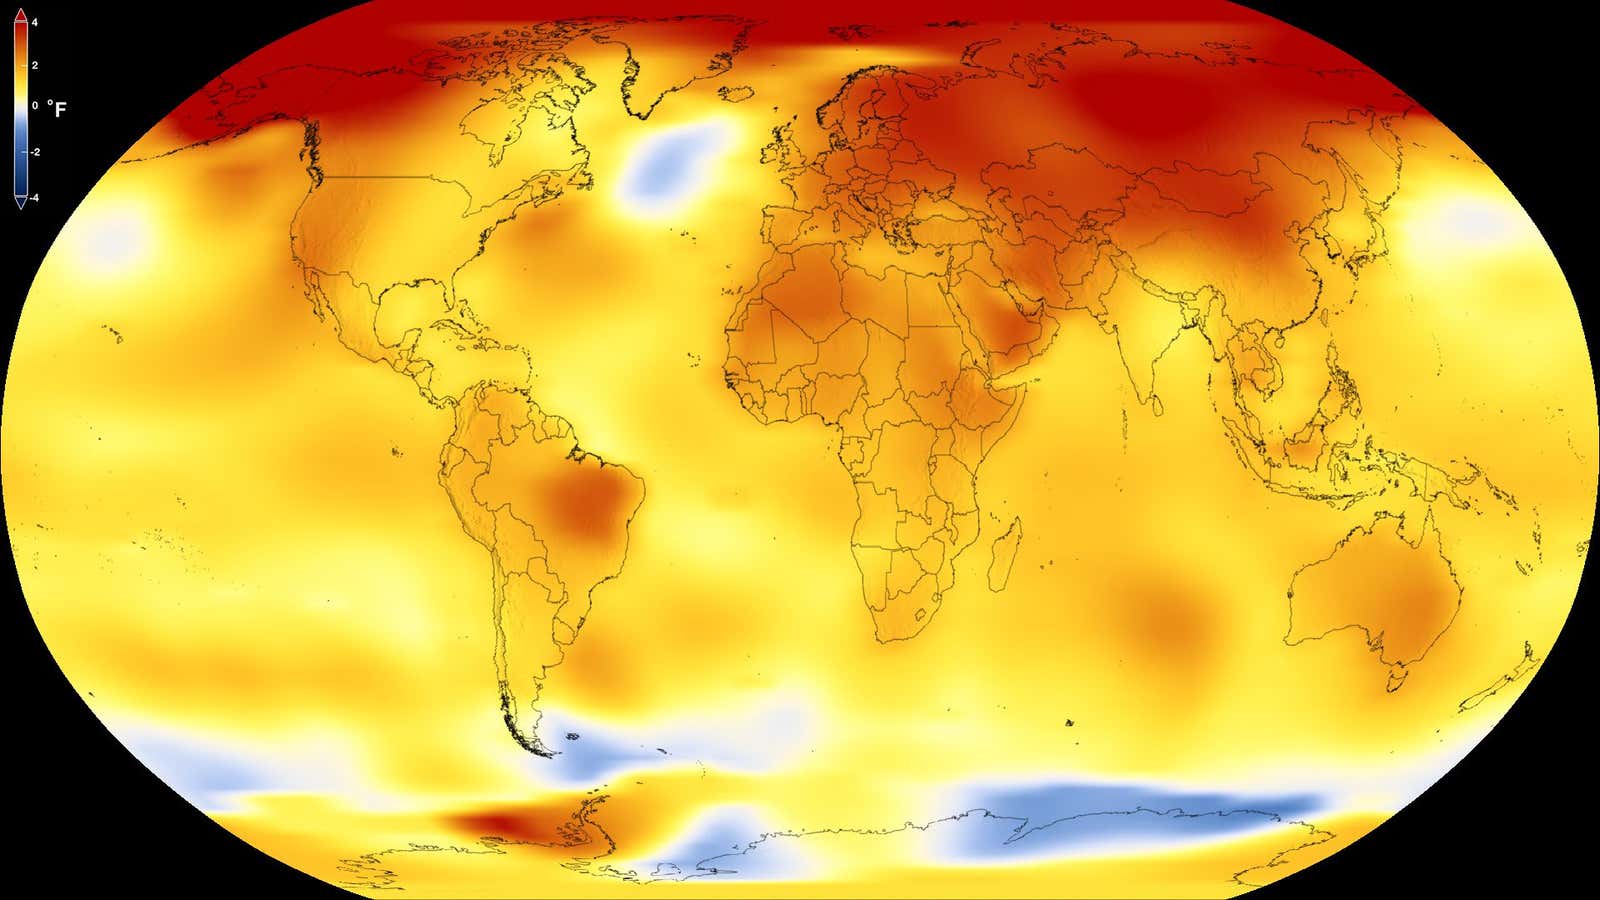 NASA compared earth’s average global temperature from 2013 to 2017 to a baseline average from 1951 to 1980. Yellows, oranges, and reds show regions warmer than the baseline.